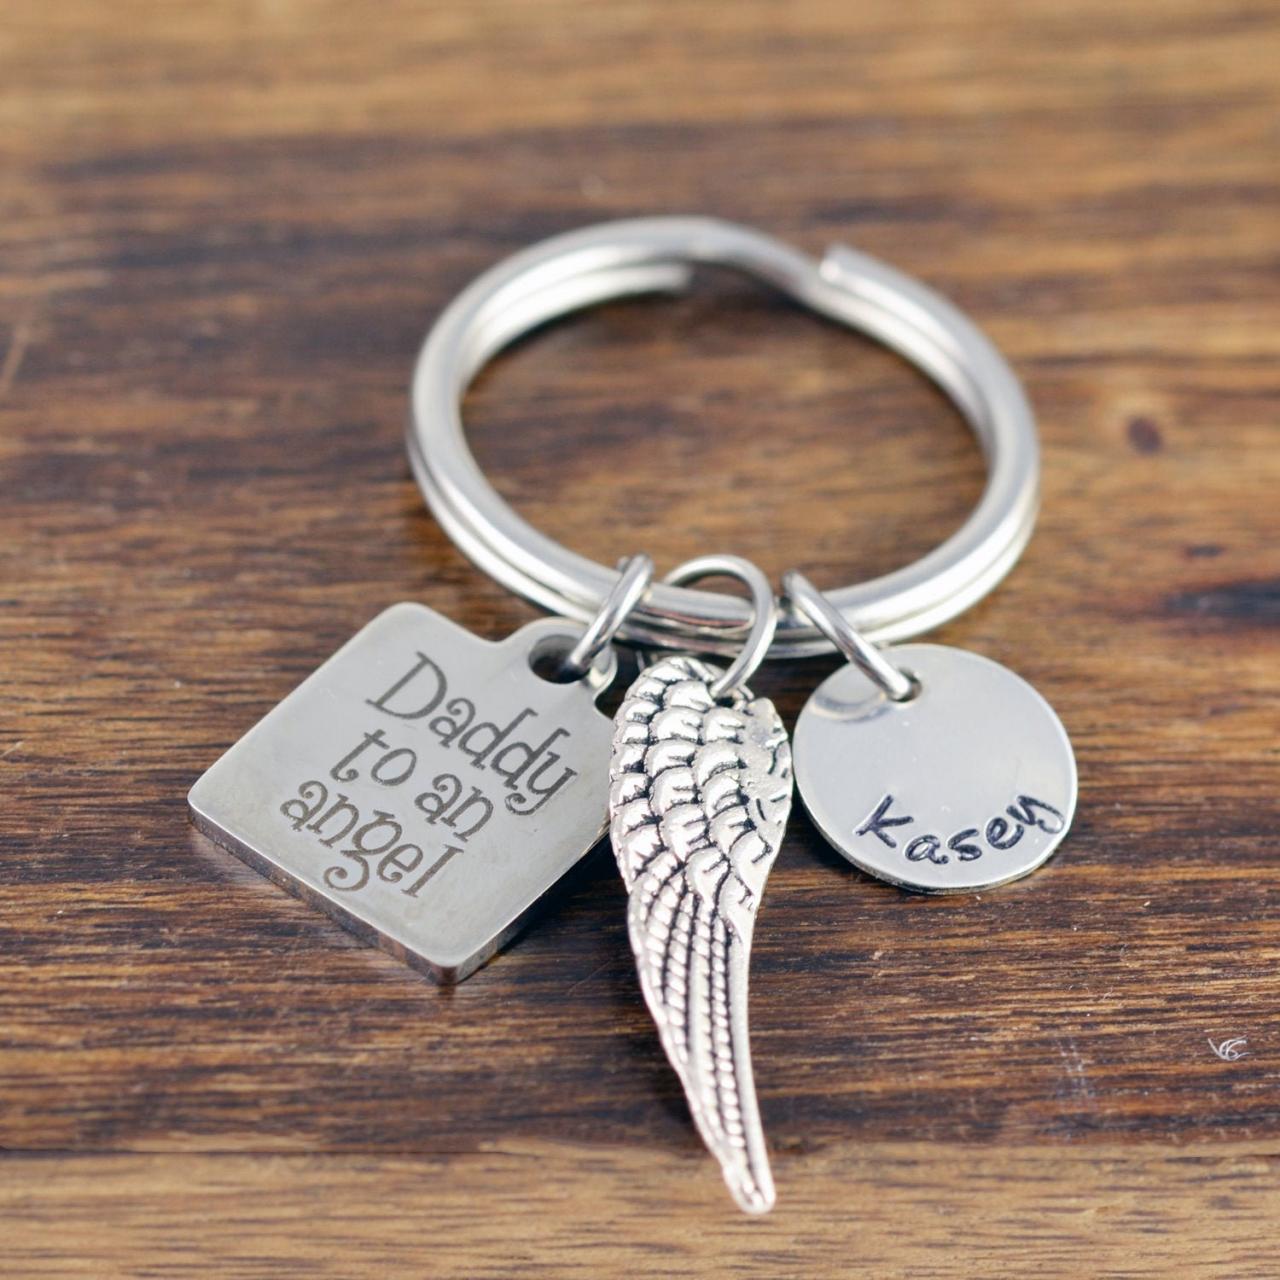 Daddy To An Angel Keychain - Memorial Keychain, Remembrance Jewelry, Bereavement Gift, Sympathy Gift, Loss Of Loved One, Infant Loss Gifts